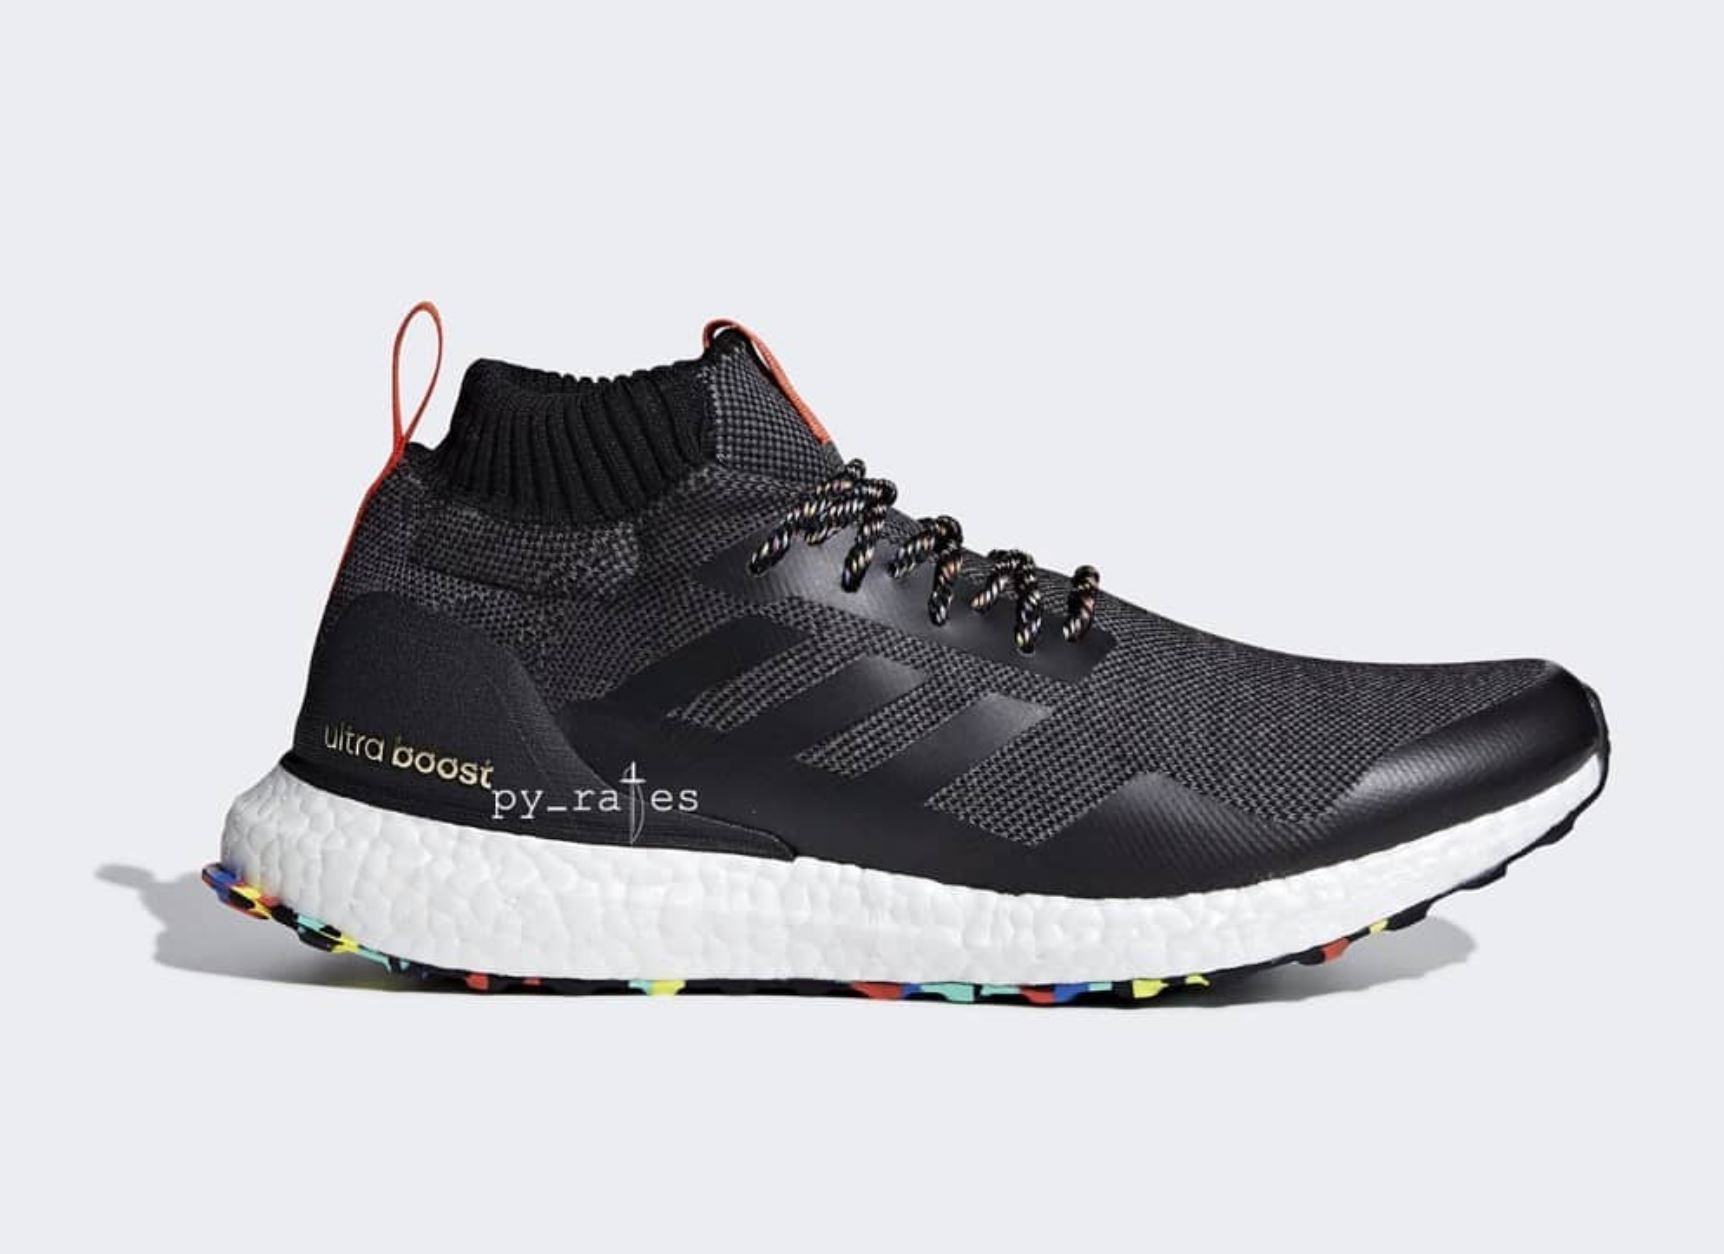 Expect Two Multicolor adidas Ultra Boost Mids in October - WearTesters